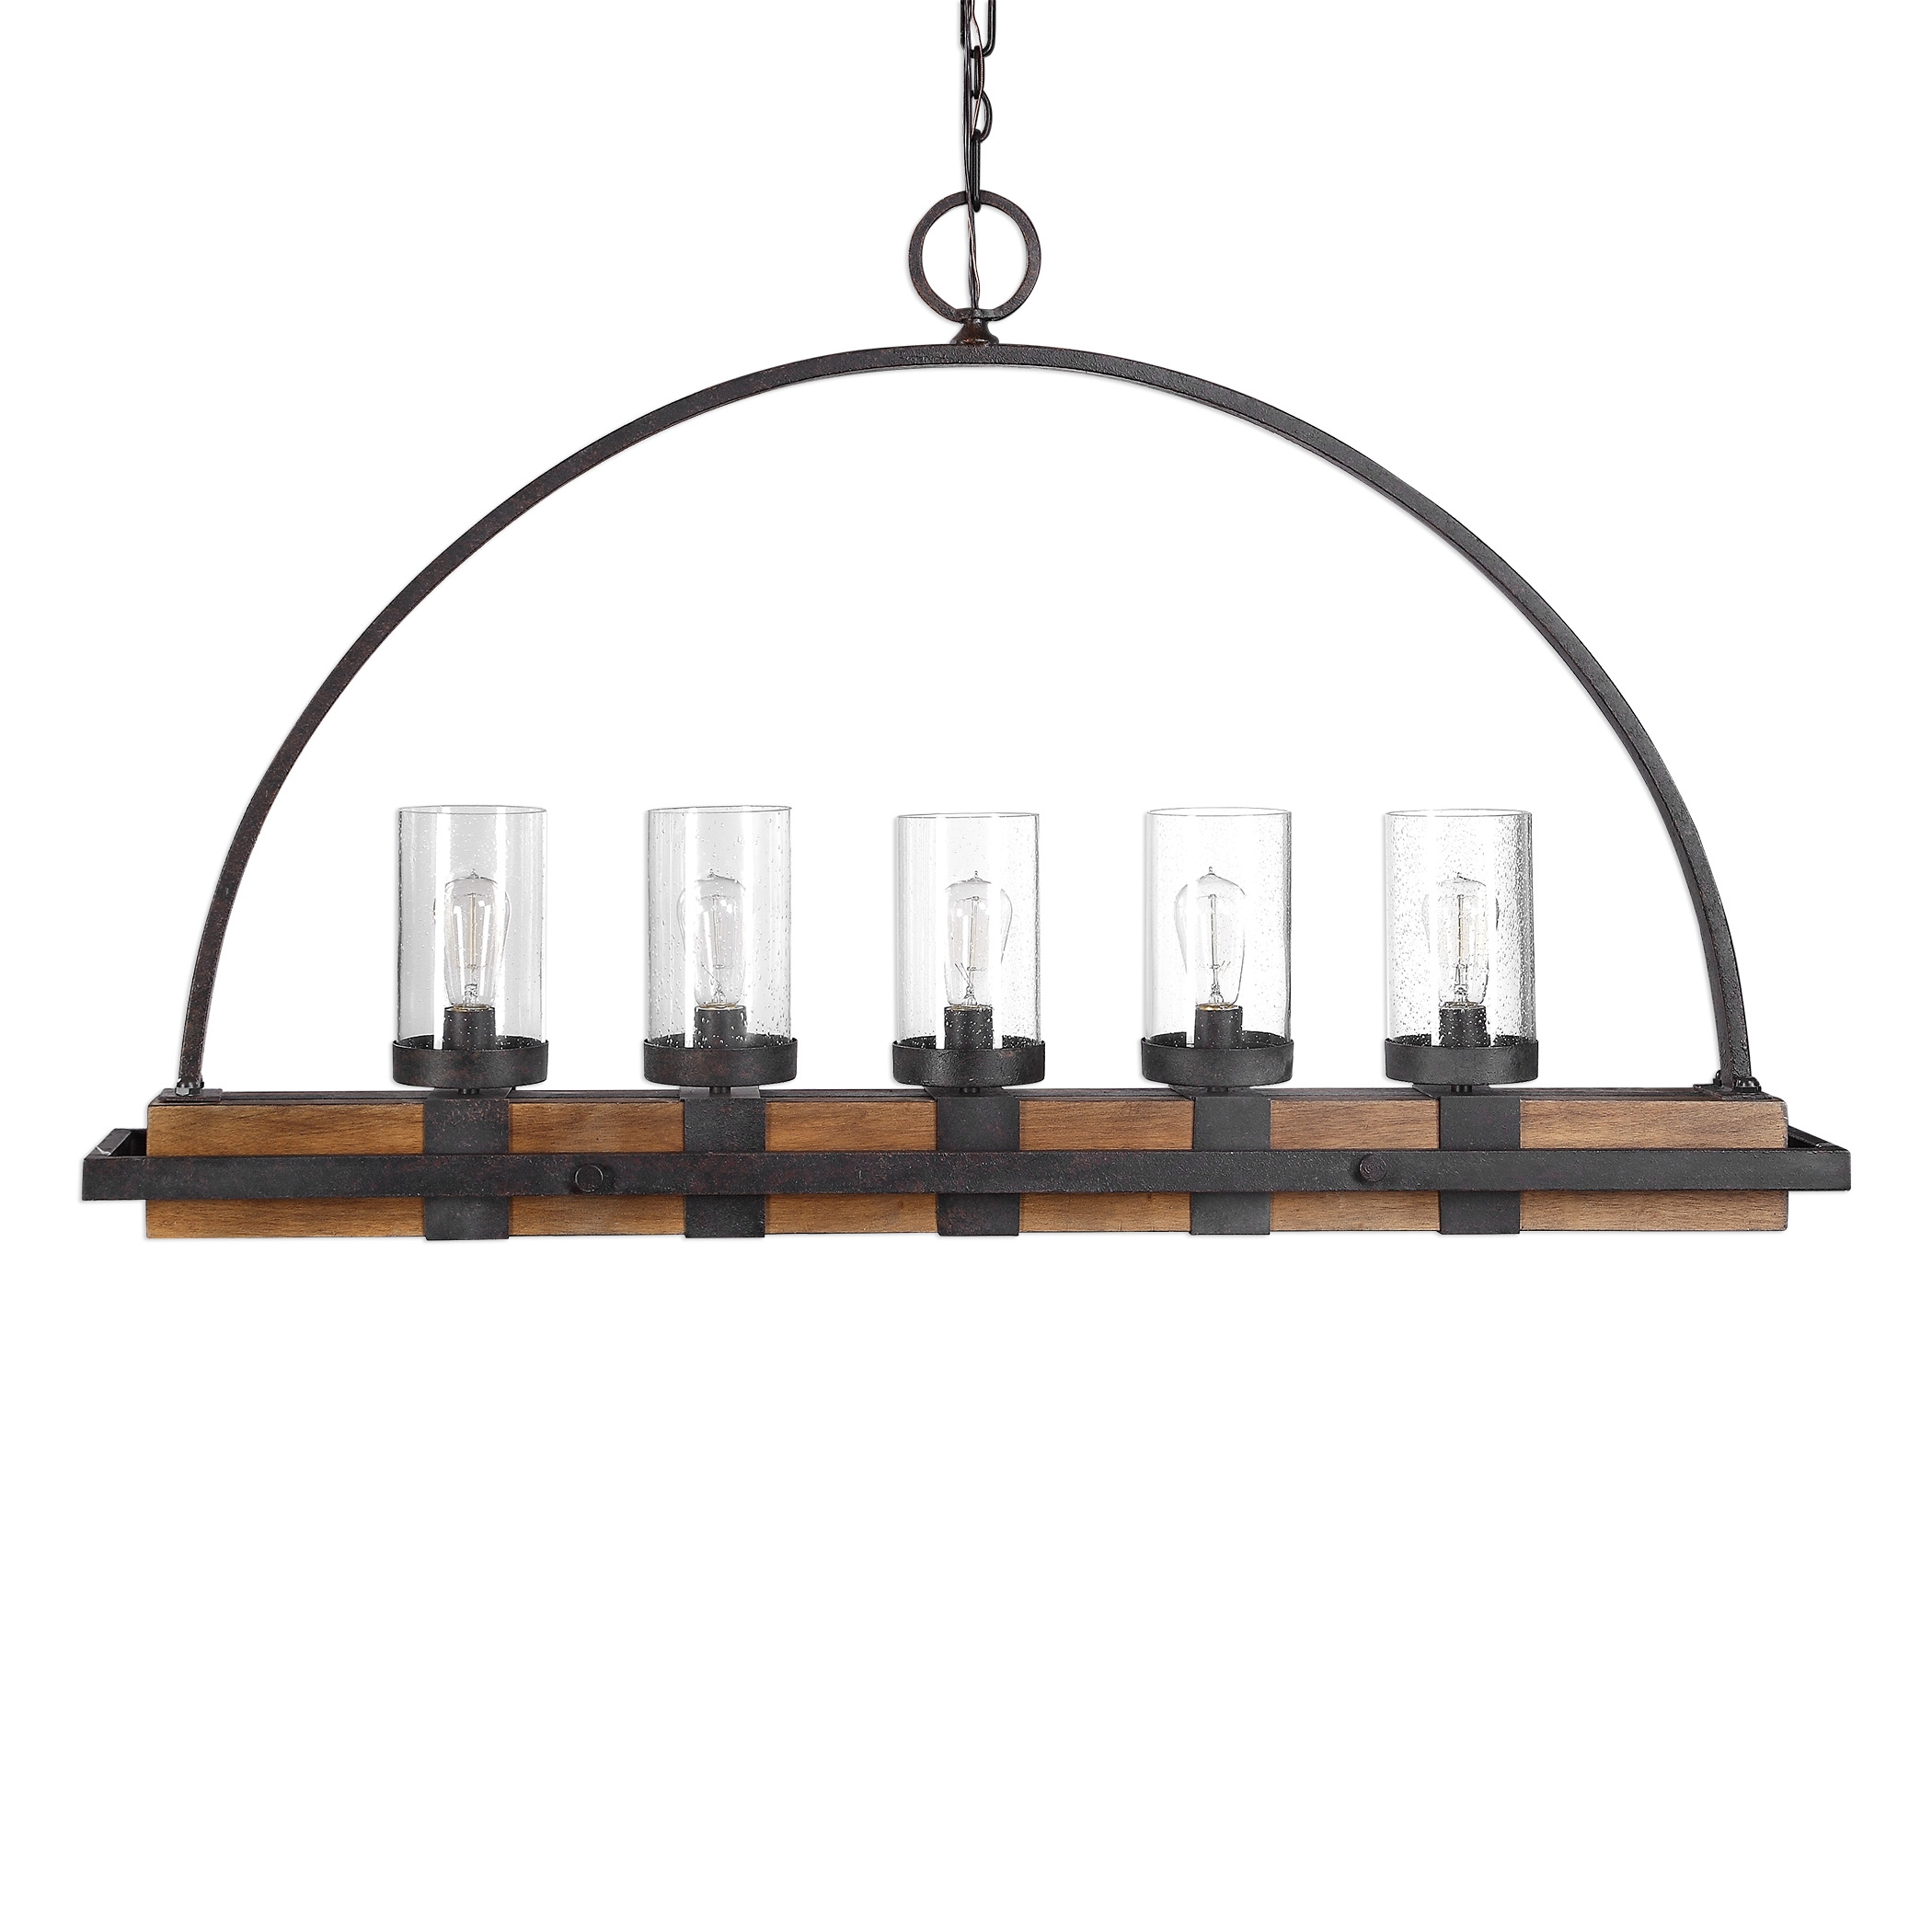 Atwood Rustic Linear Chandelier, 5 Light - Image 0